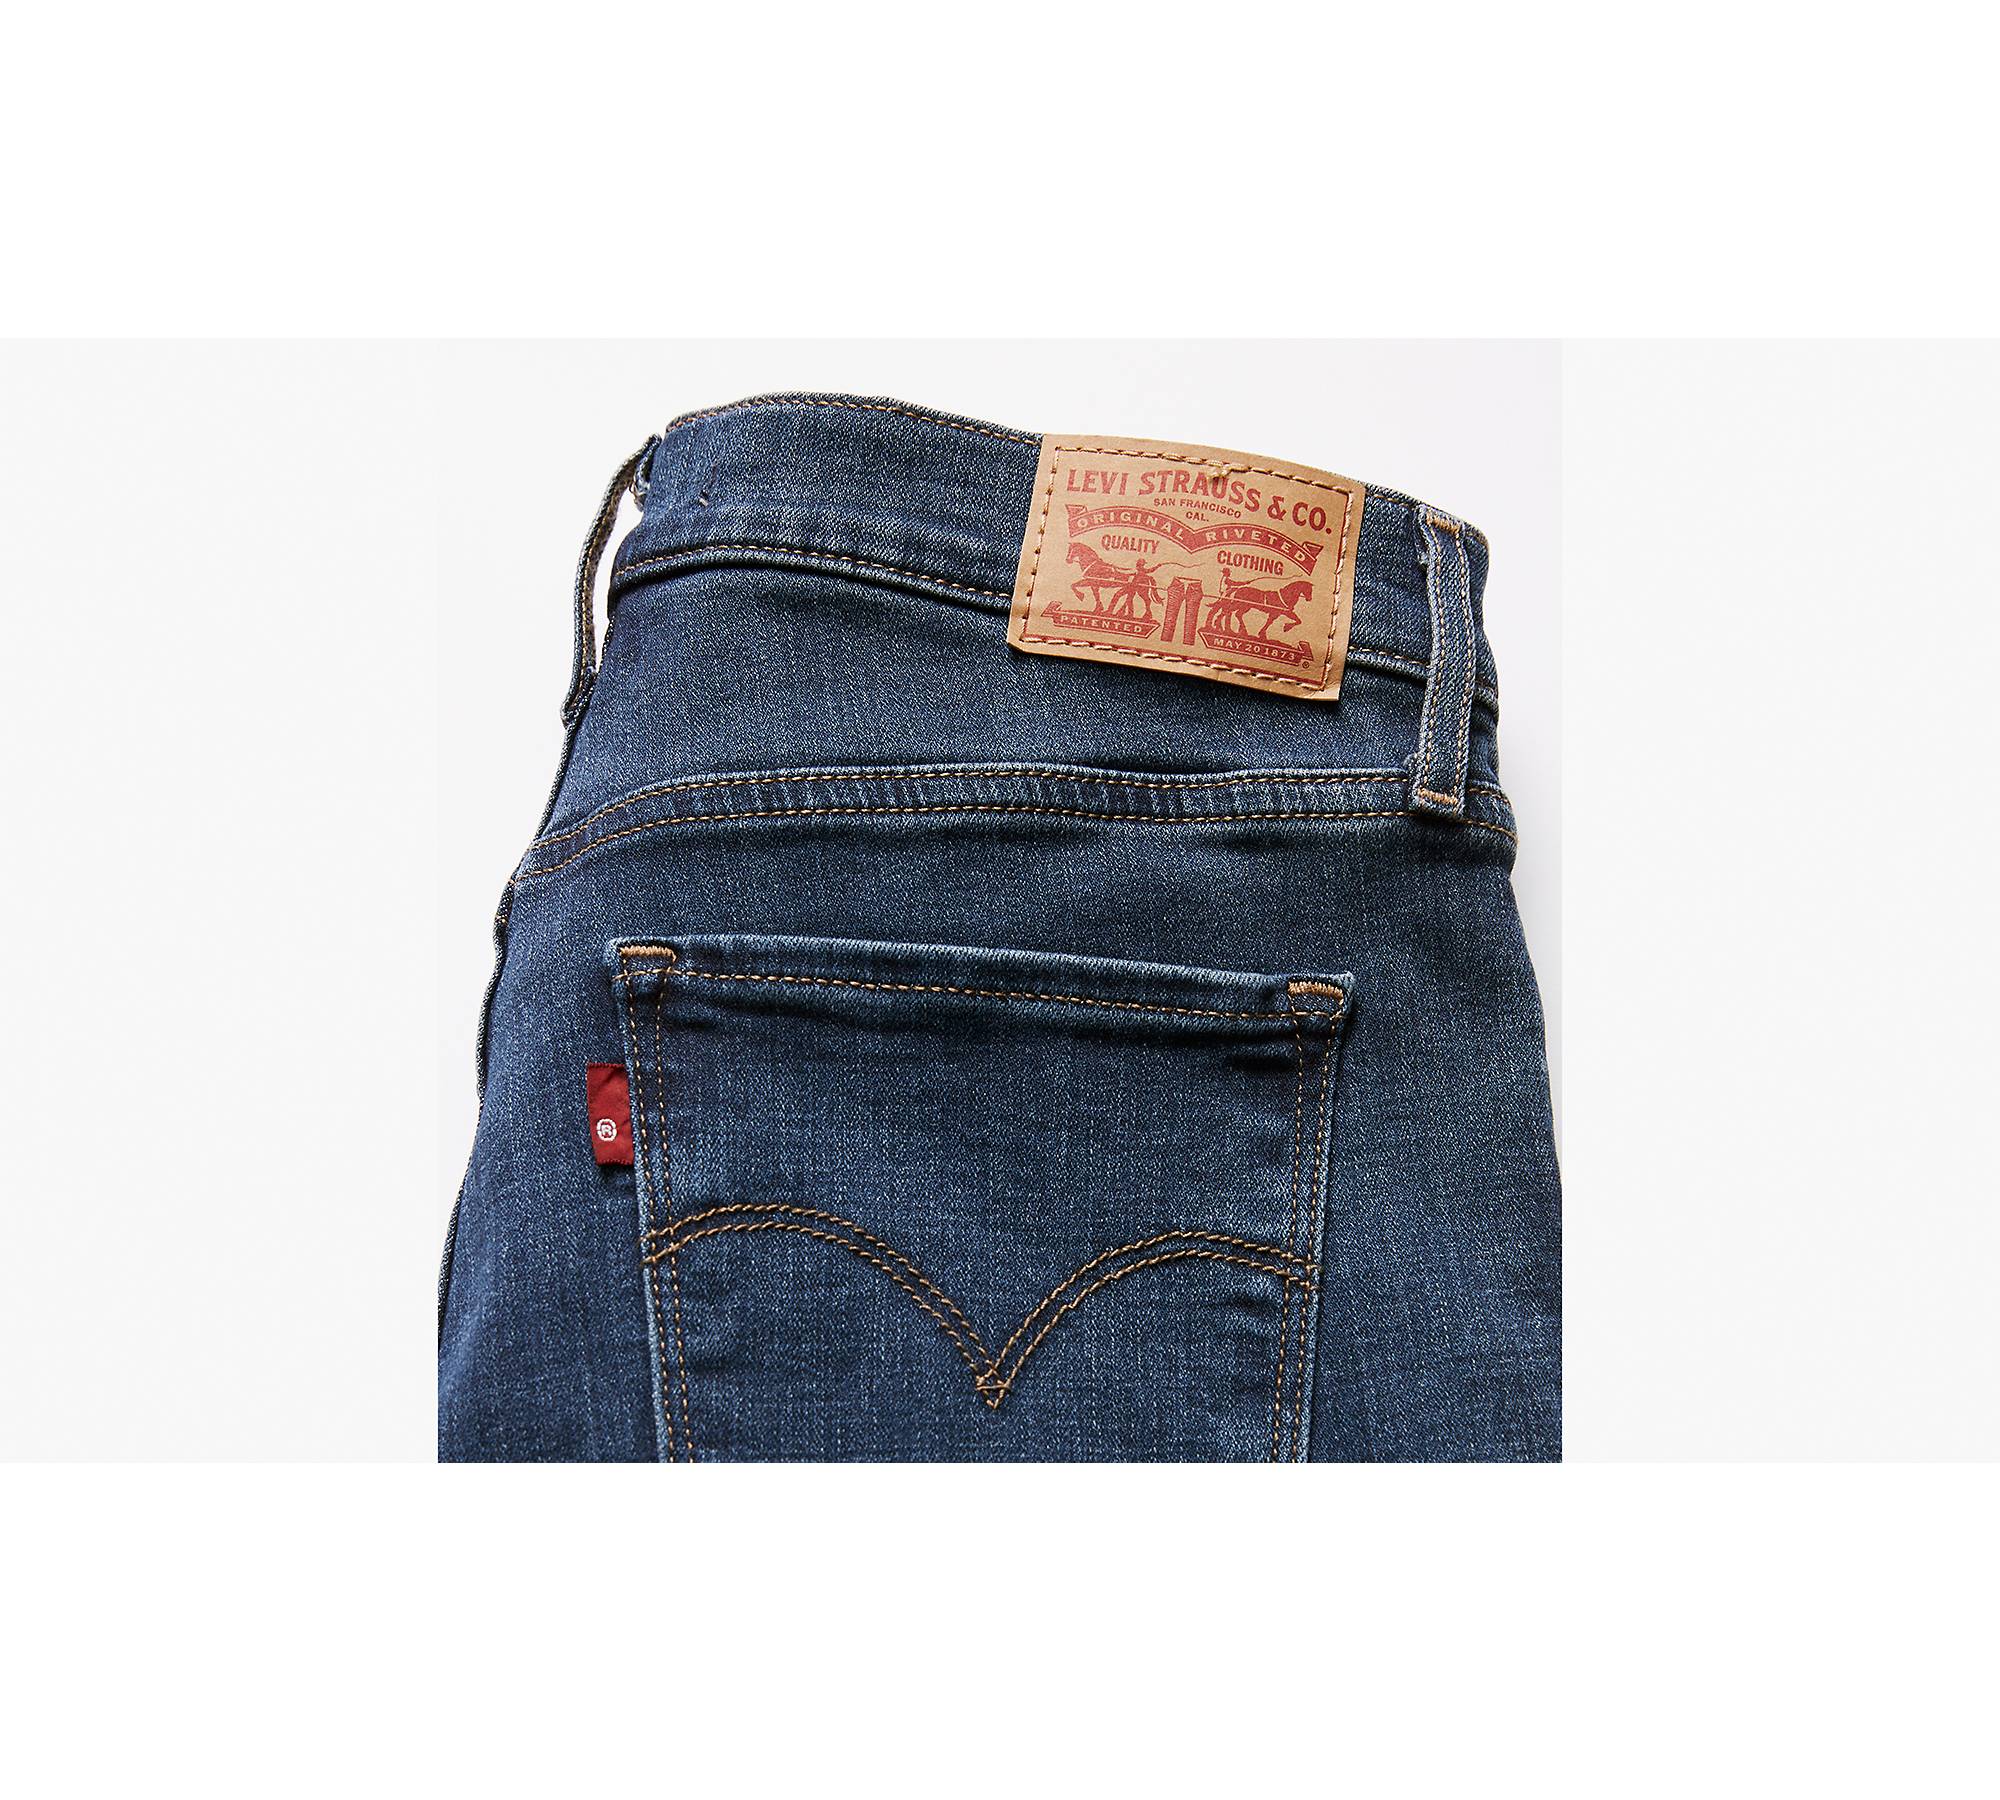 Signature by Levi Strauss & Co. Women's Modern Simply Stretch